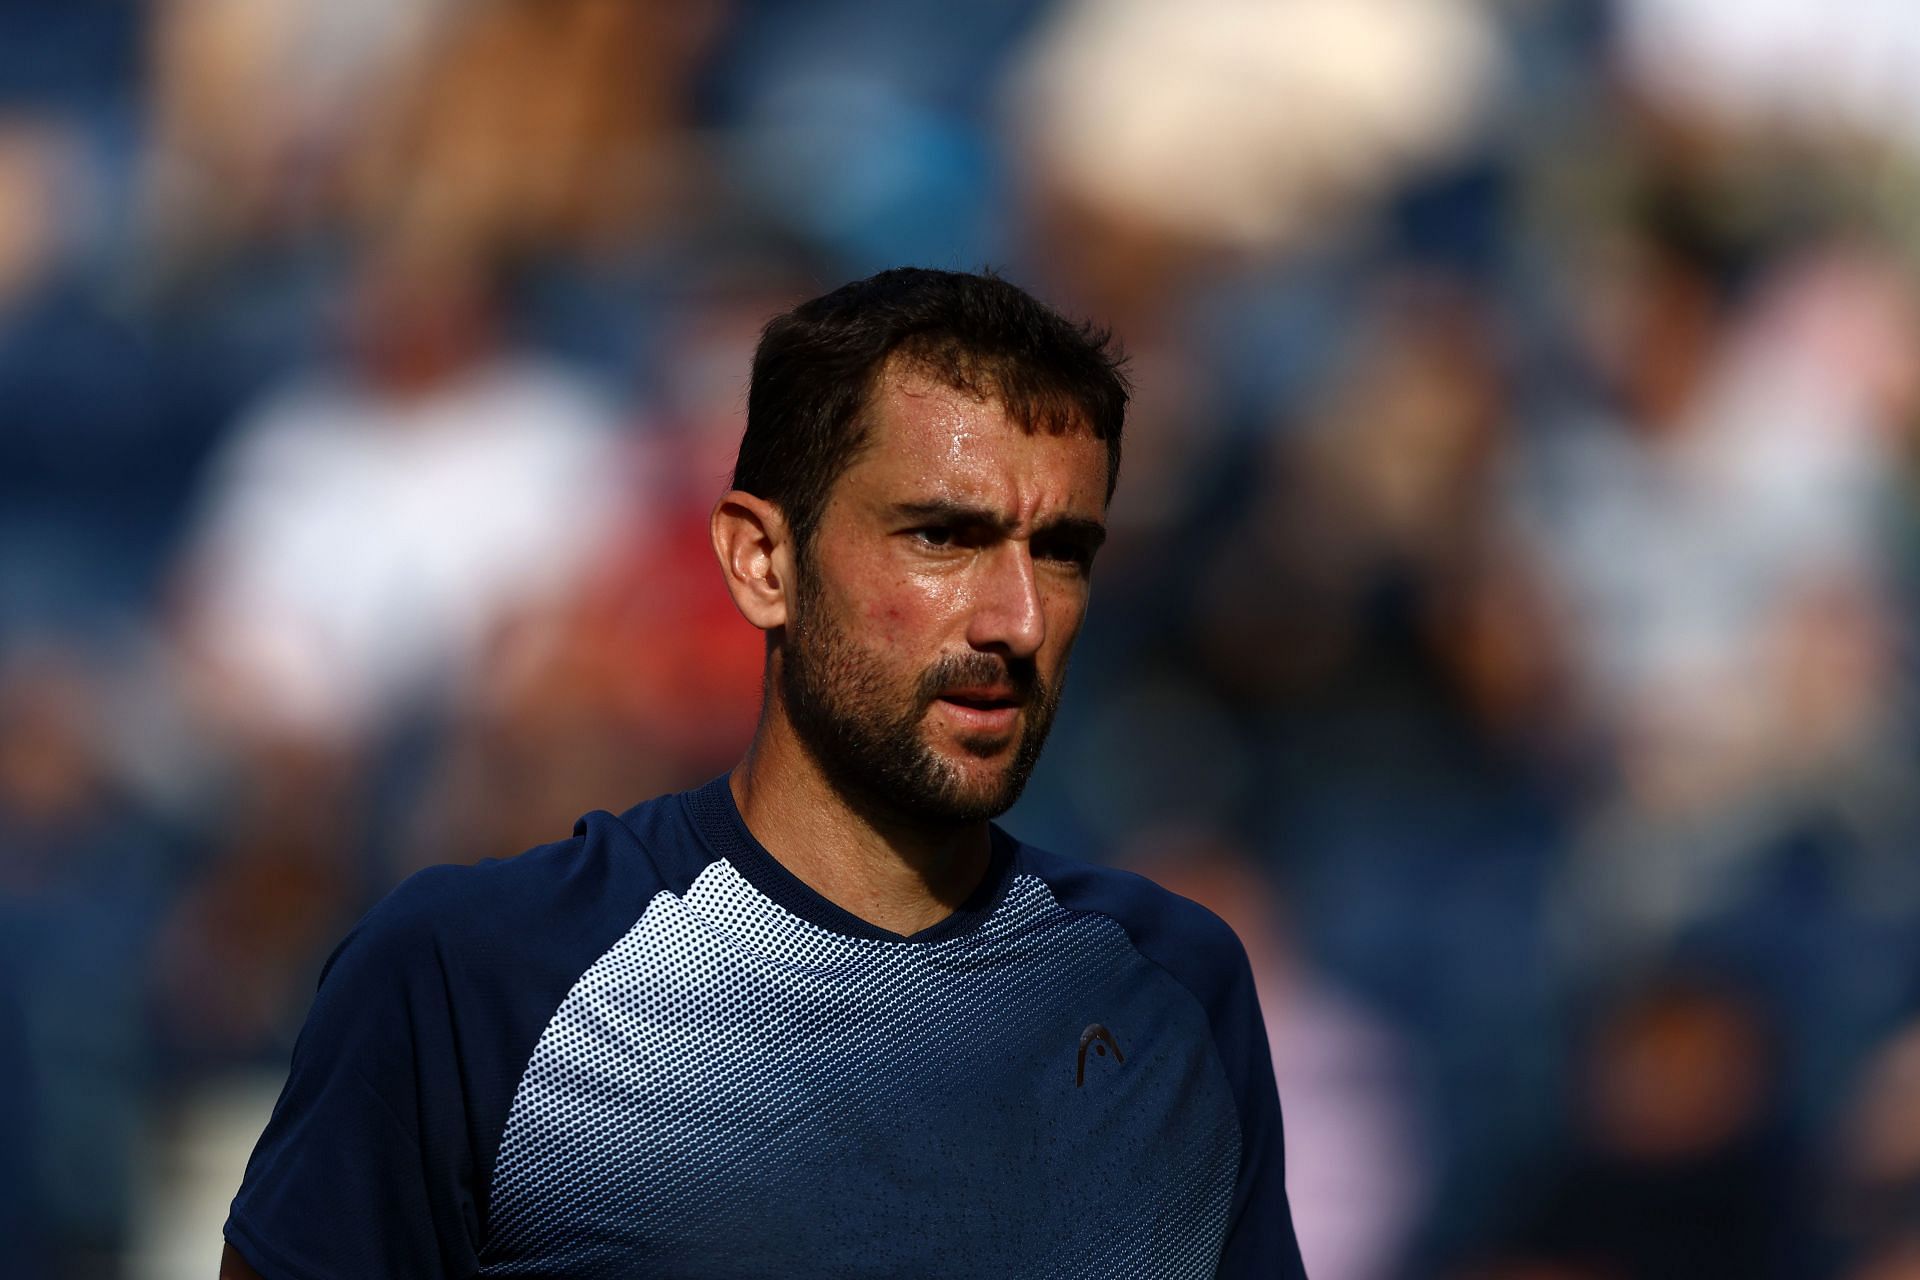 Marin Cilic is also playing doubles in the Dubai Tennis Championships